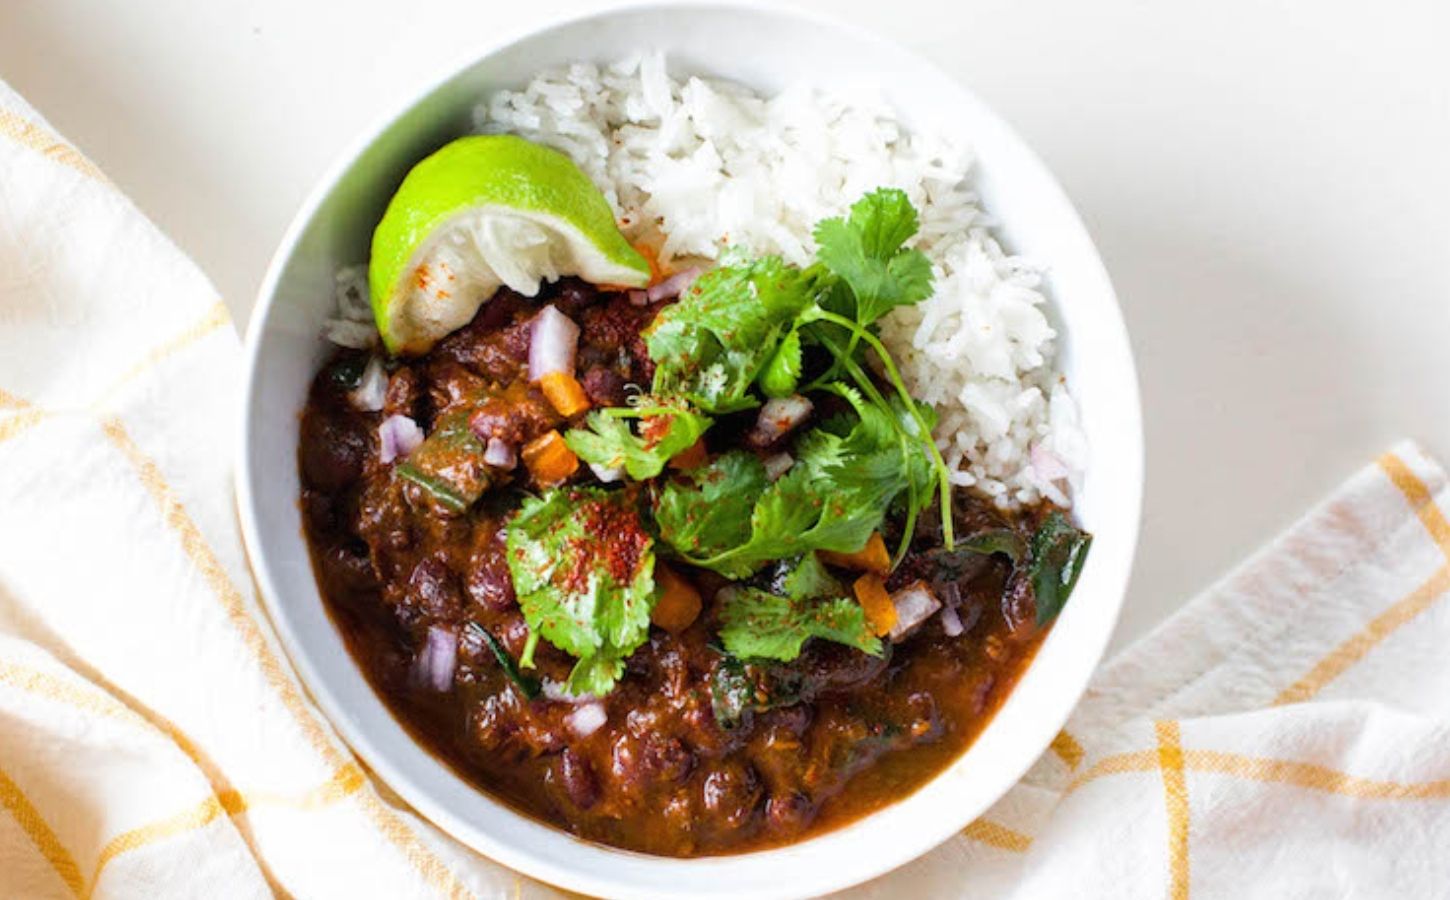 A coconut black bean stew made to a plant-based recipe